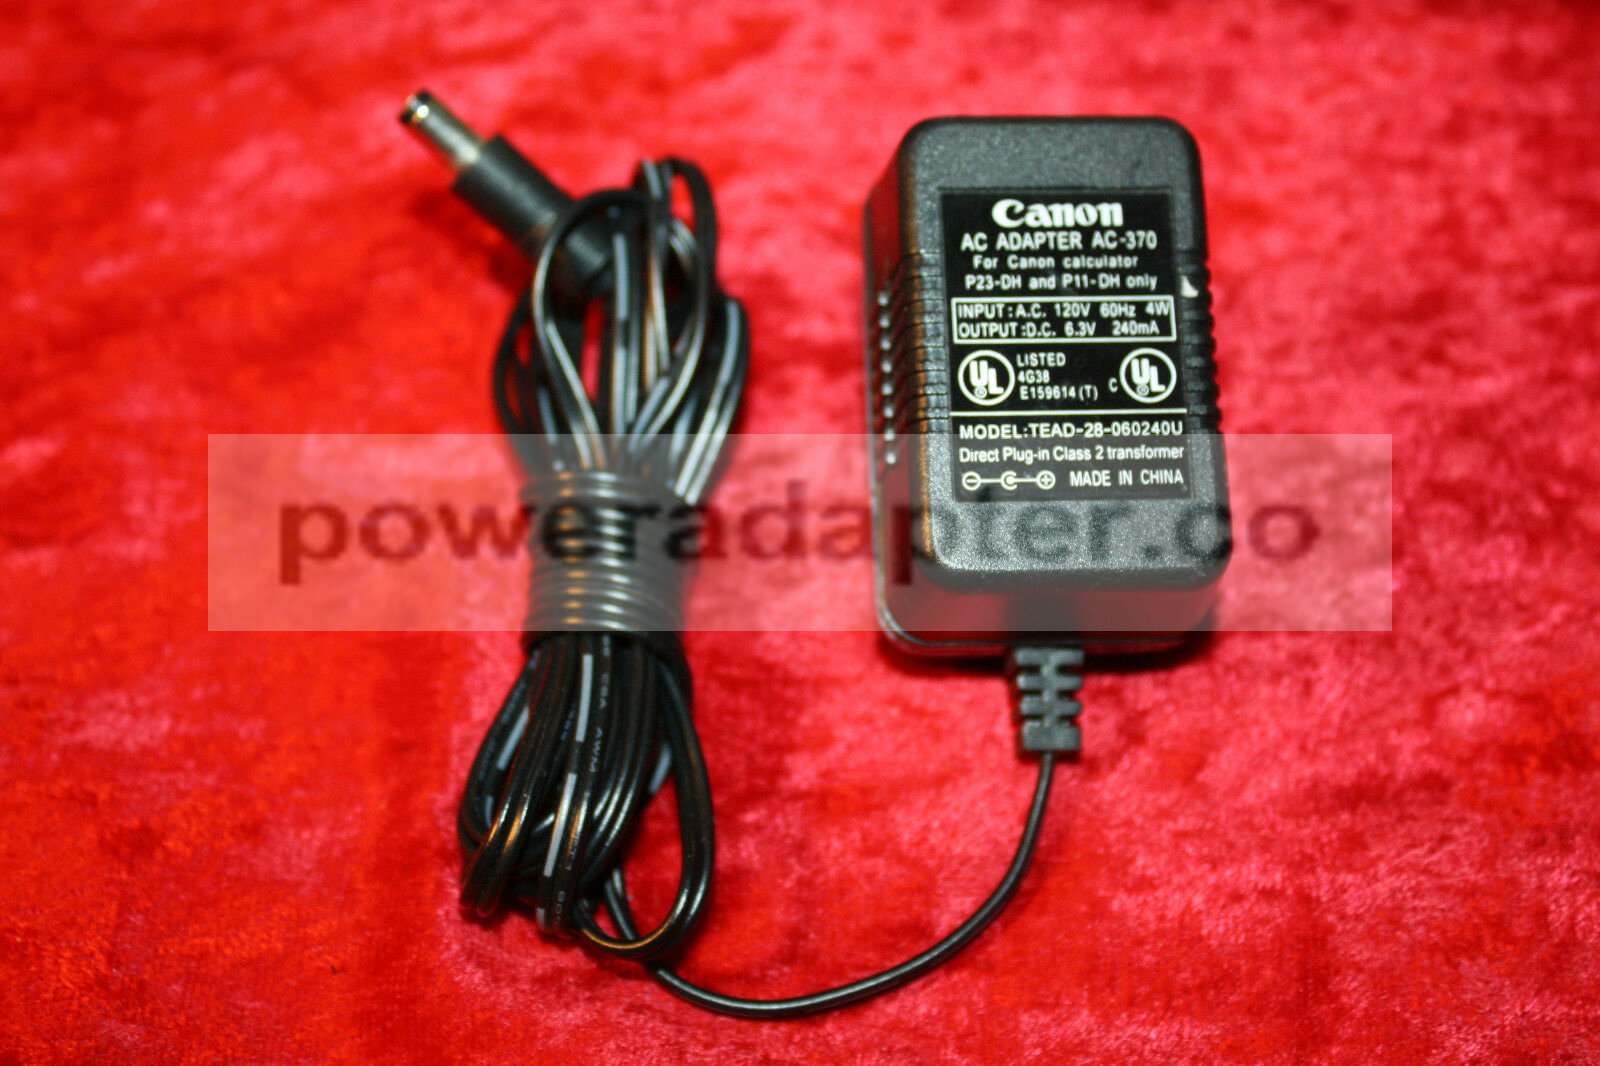 Canon AC-370 AC Adapter TEAD-28-060240U Condition: new Brand: Canon Type: AC Adapter Model: TEAD-28-060240U MPN: A - Click Image to Close